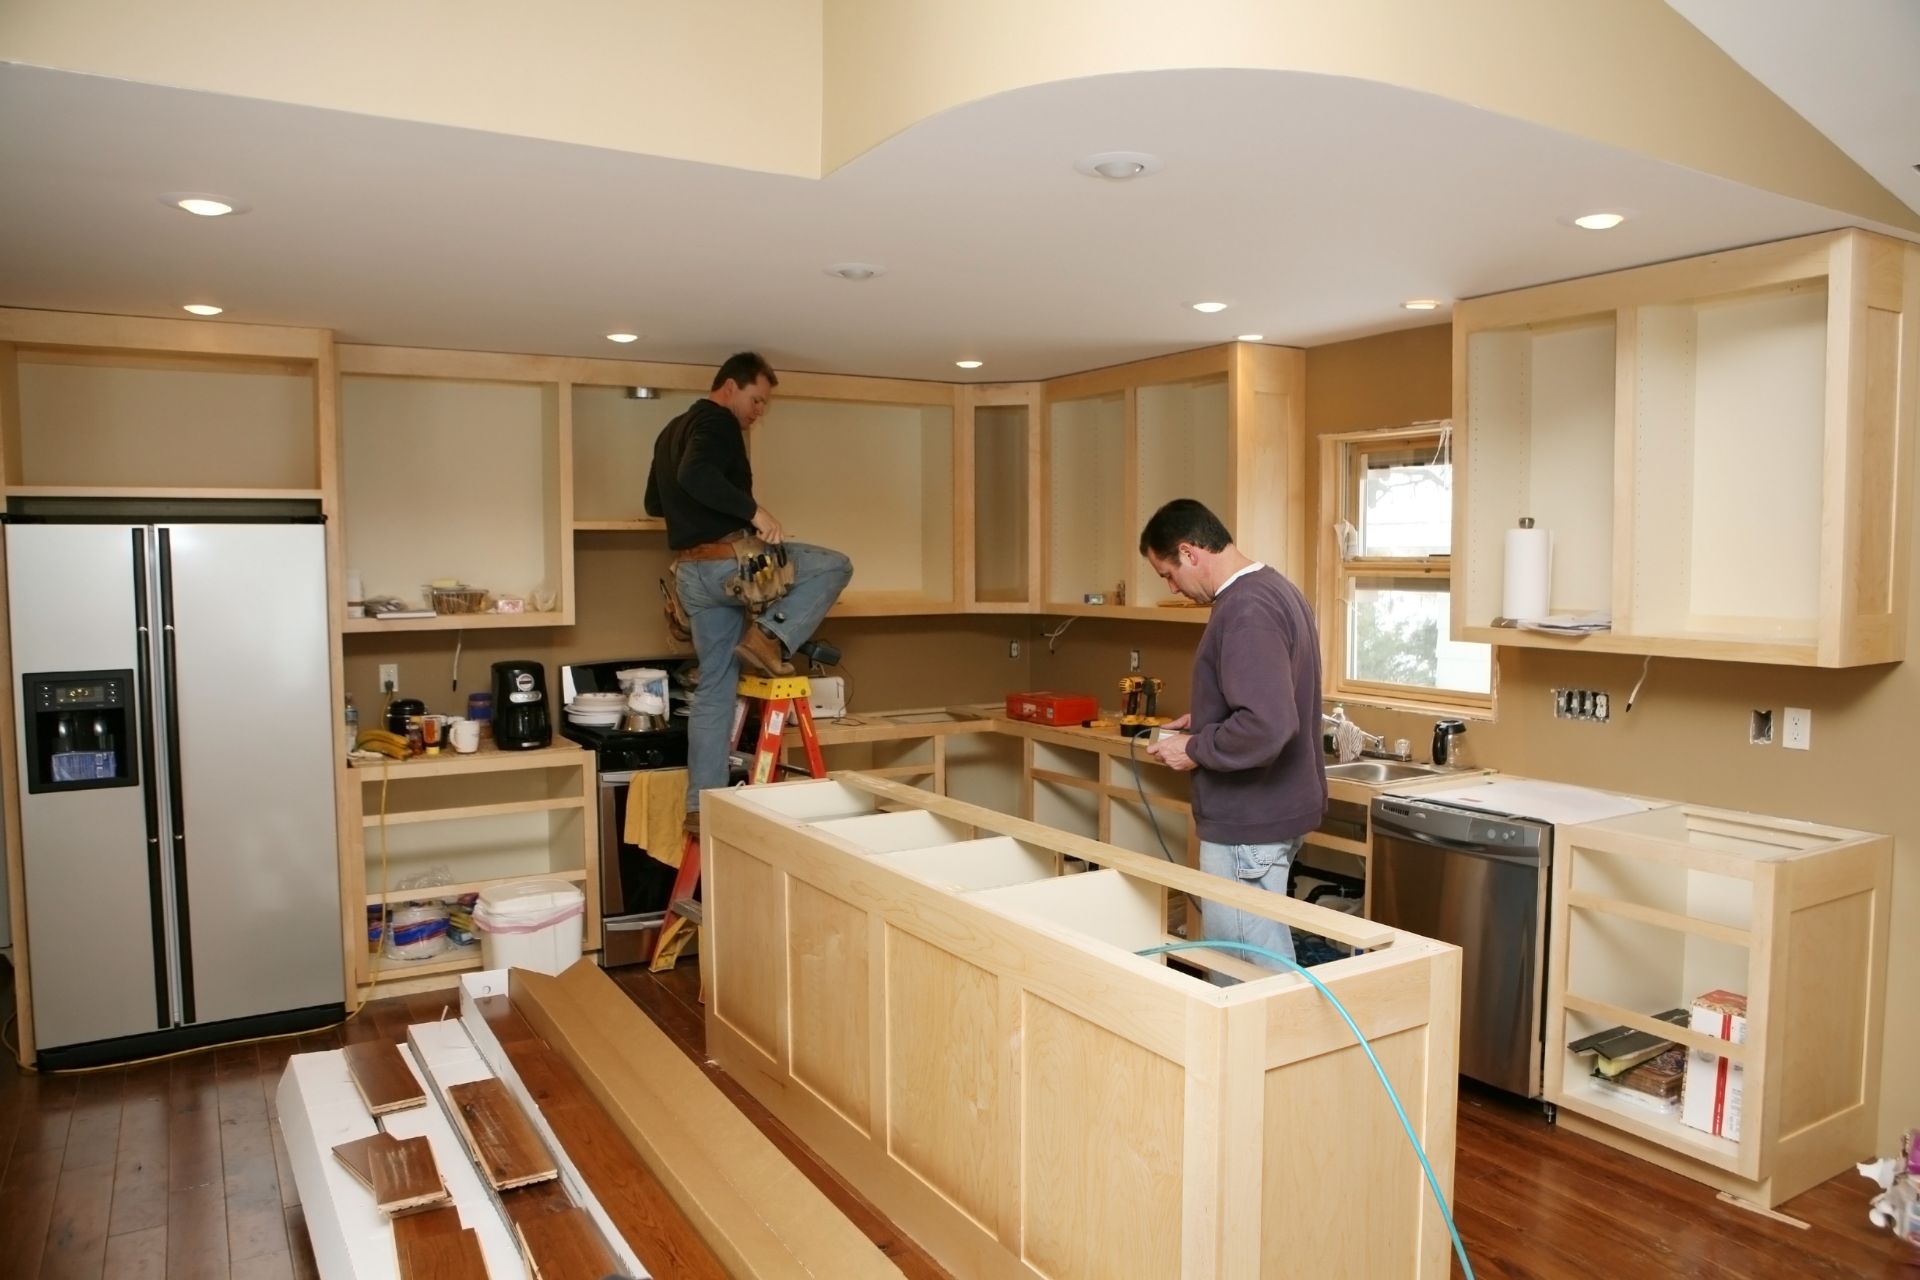 How To Find A Contractor For Kitchen Remodel 1 